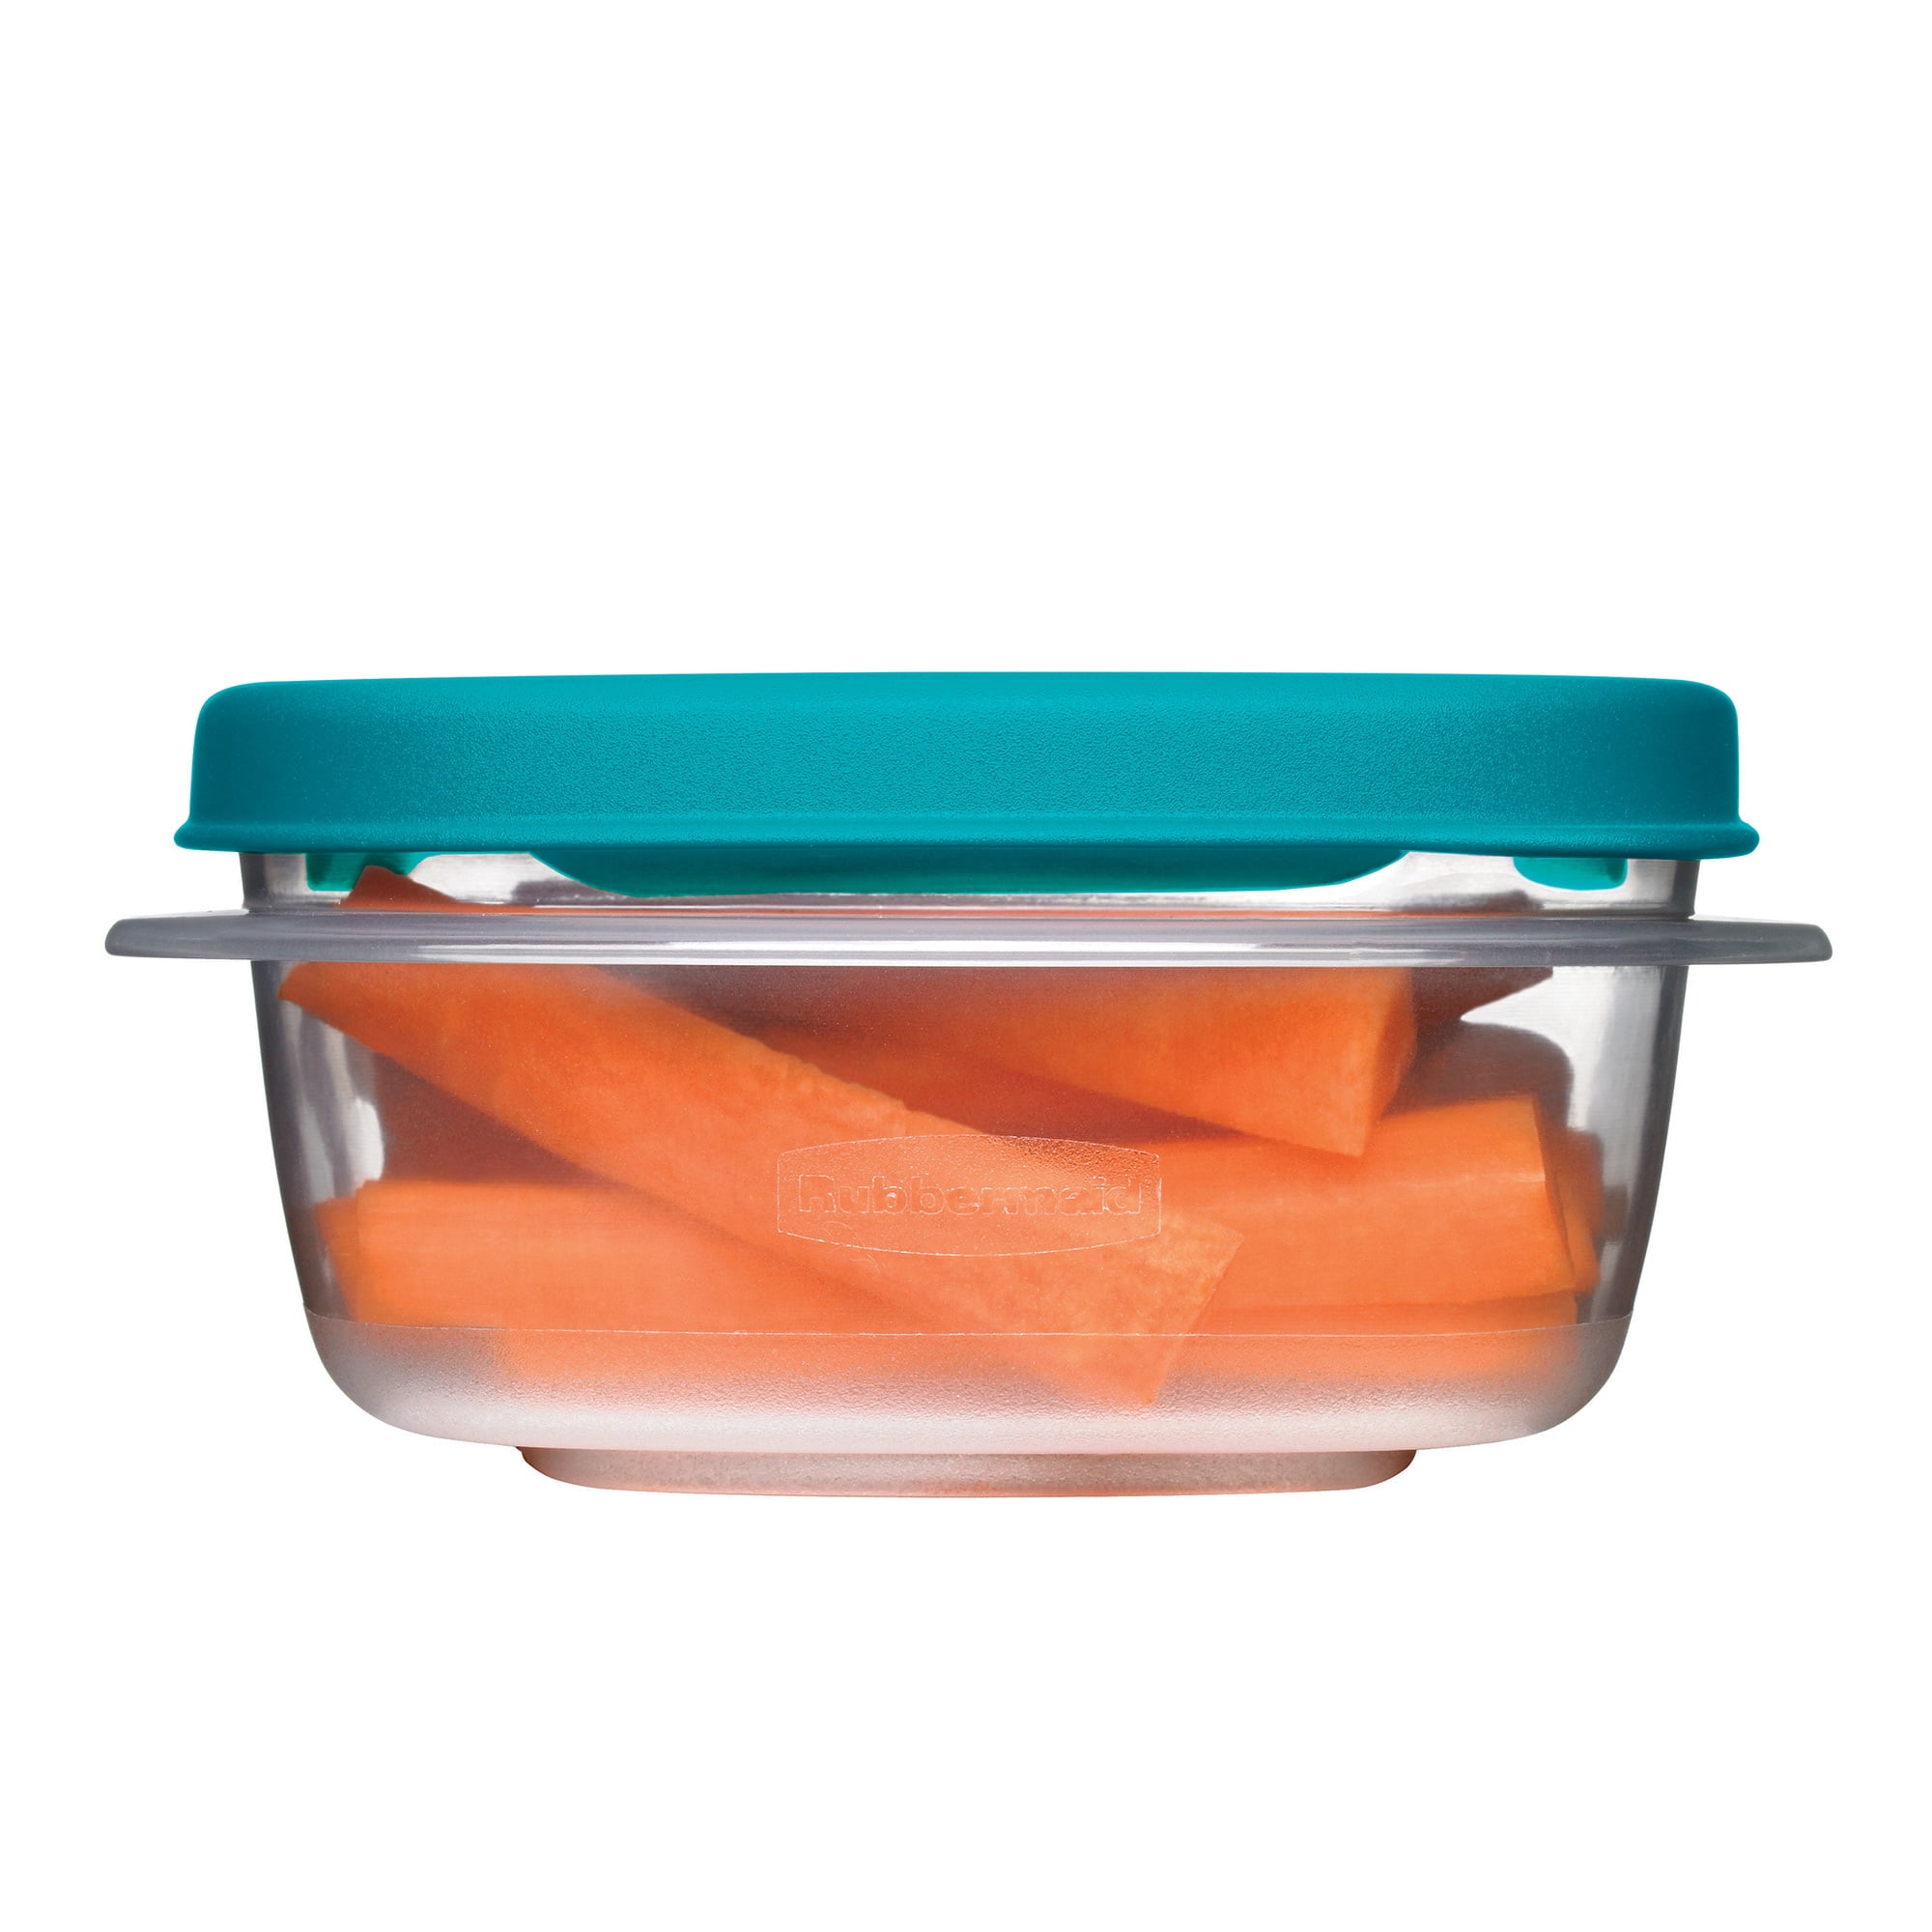 Rubbermaid Easy Find Lids 320oz (2.5 gal) Plastic Rectangle Food Storage  Container Clear